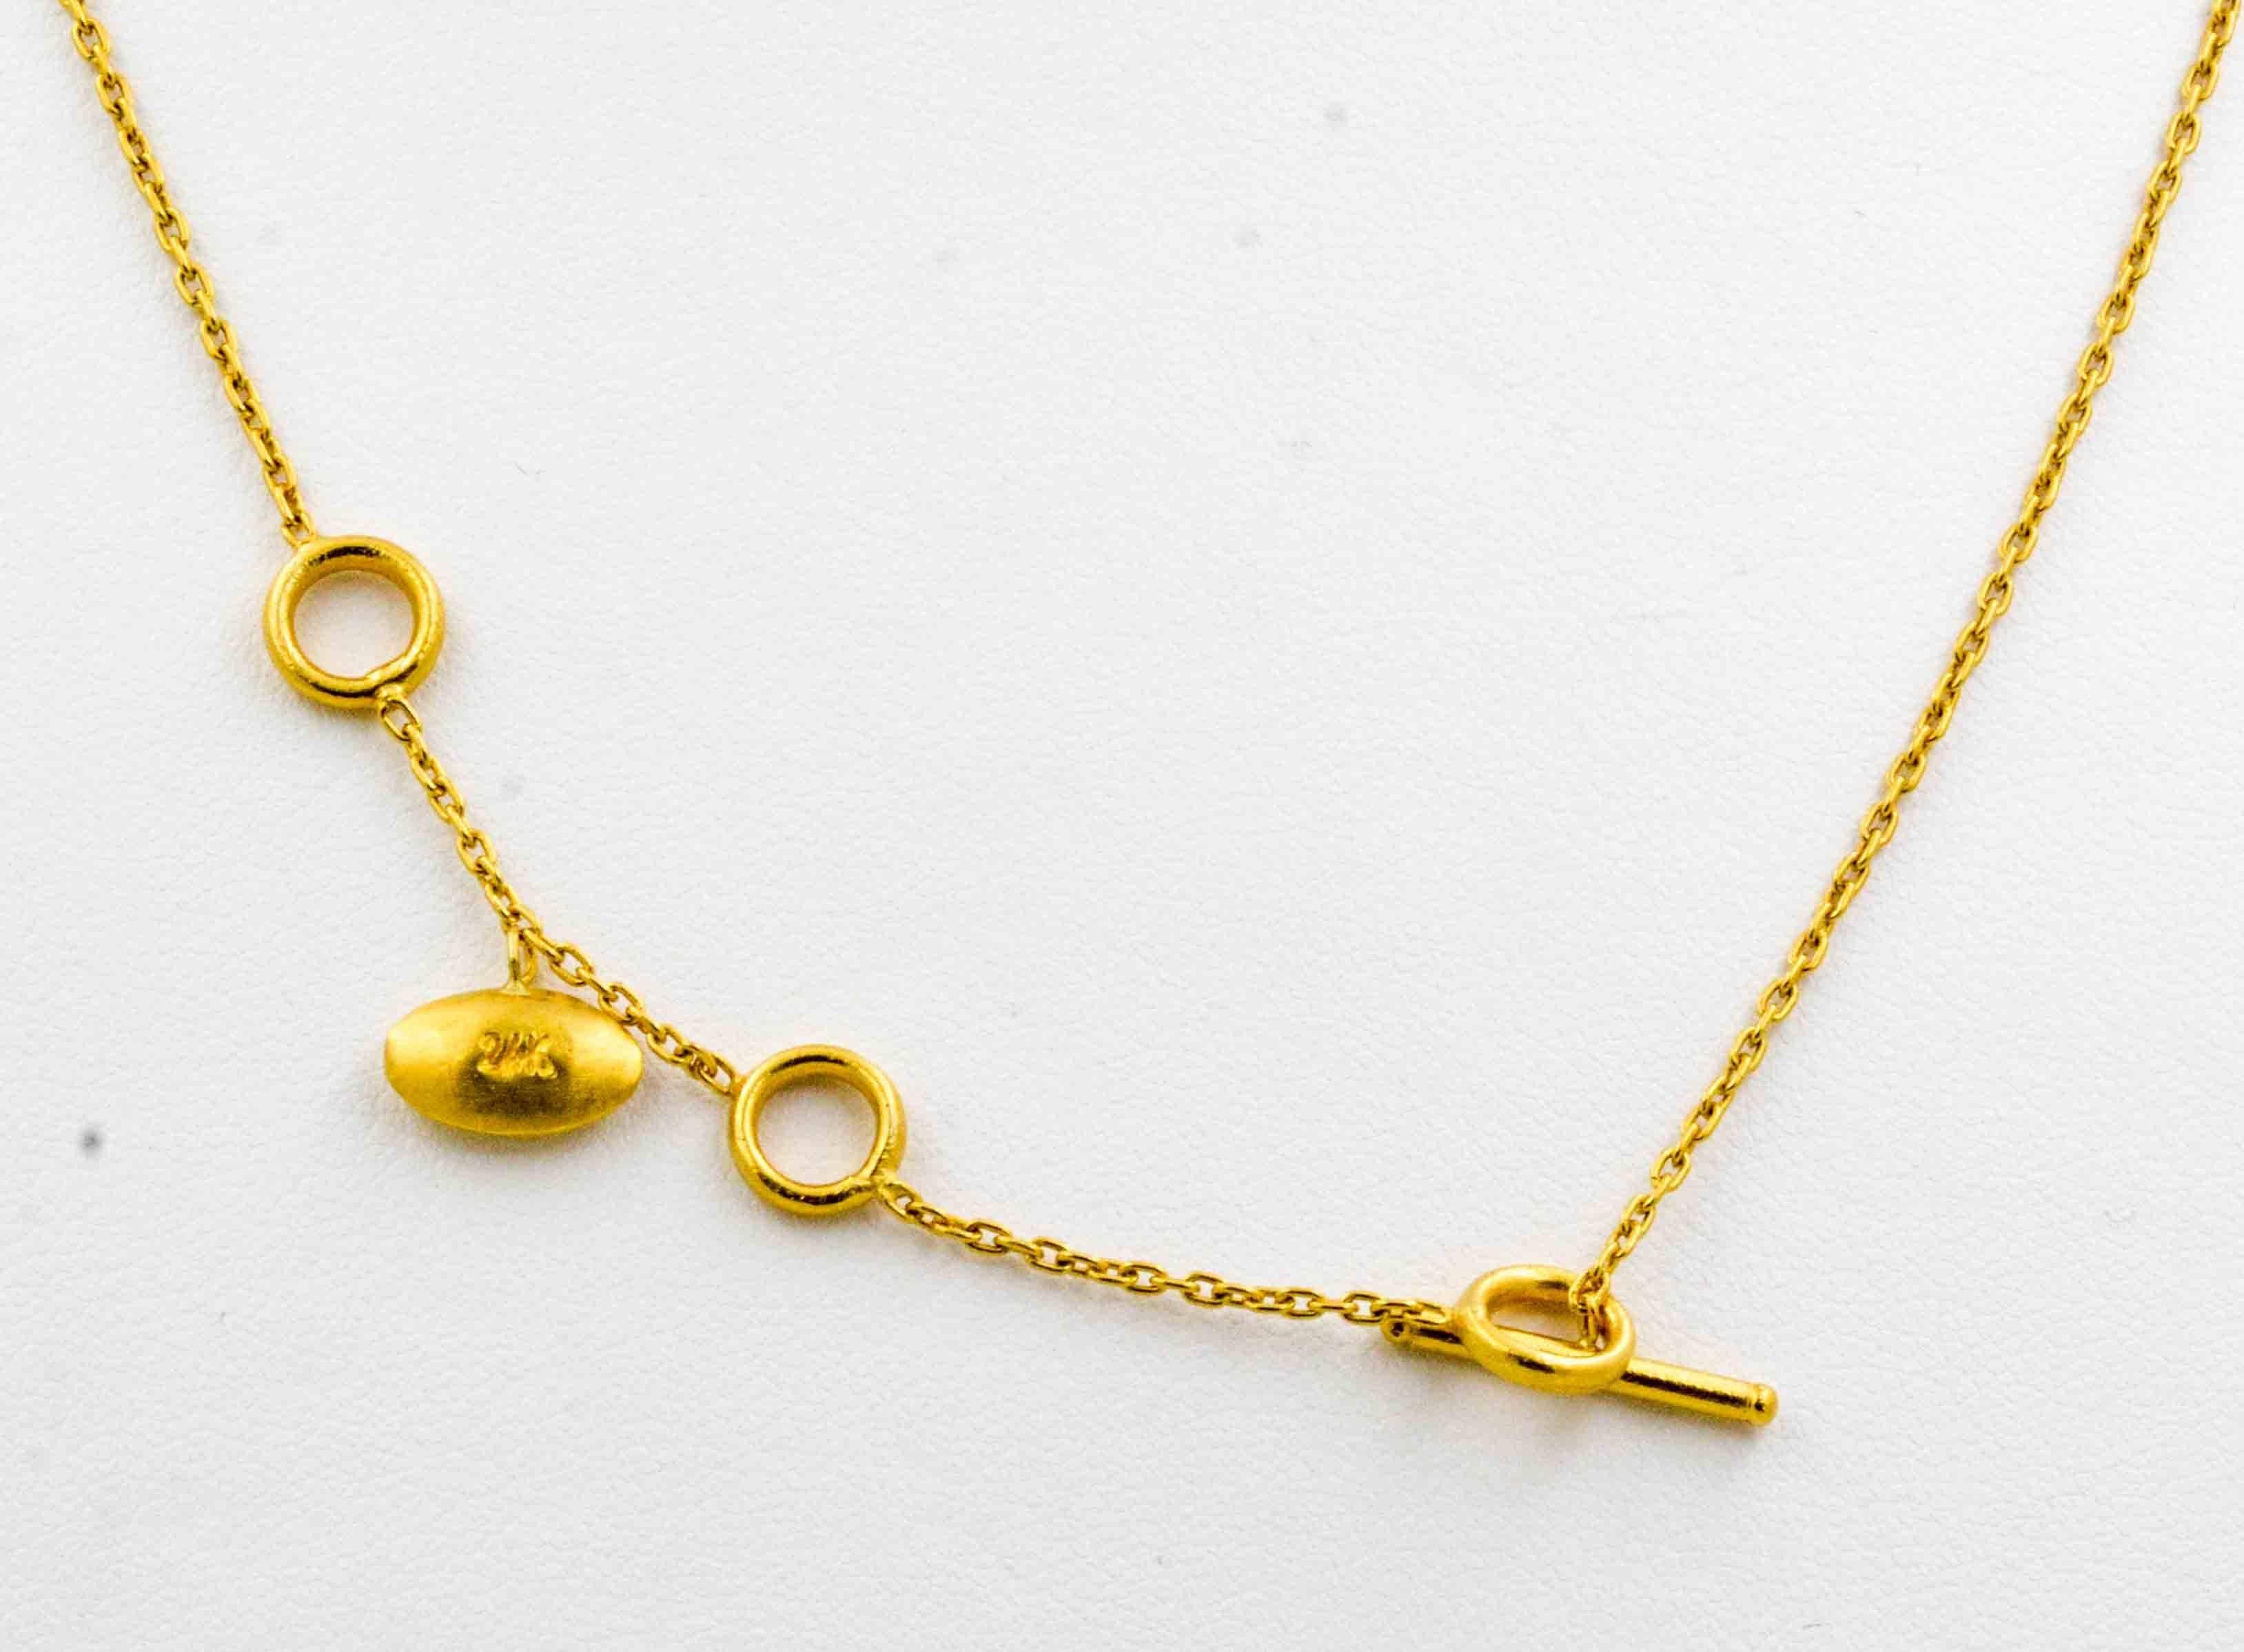 Lika Behar uses bright 24 karat yello8105926w gold in her Etruscan jewelry designs. This Lika Behar "Krissy" necklace with center oxidized sterling silver pendant has 0.24 ctw diamonds set in a flower design. The exquisite 24 karat yellow